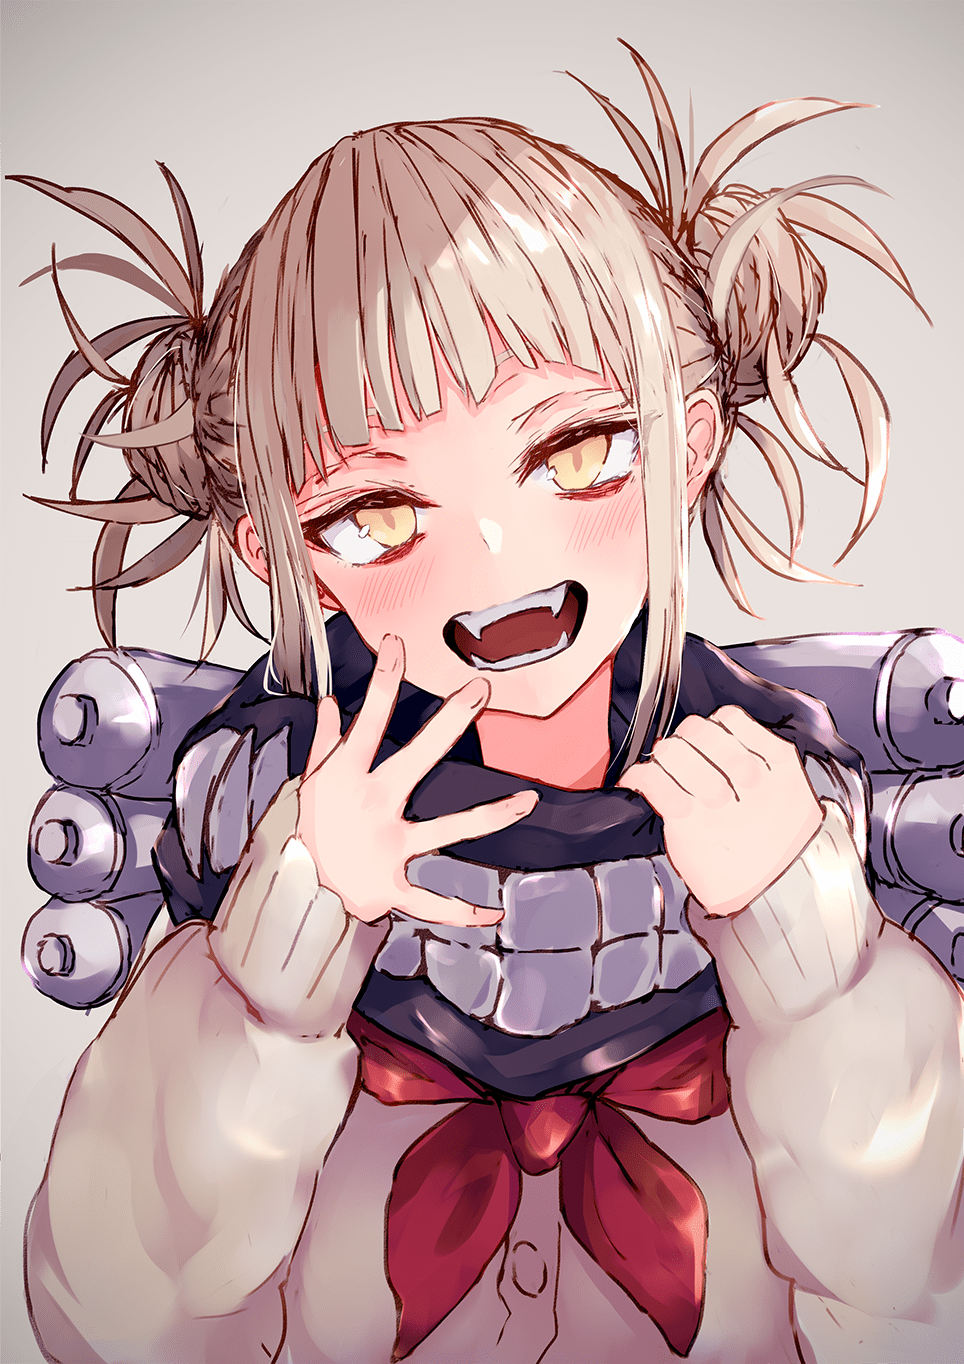 Himiko Toga Wallpapers Top Free Himiko Toga Backgrounds Wallpaperaccess 